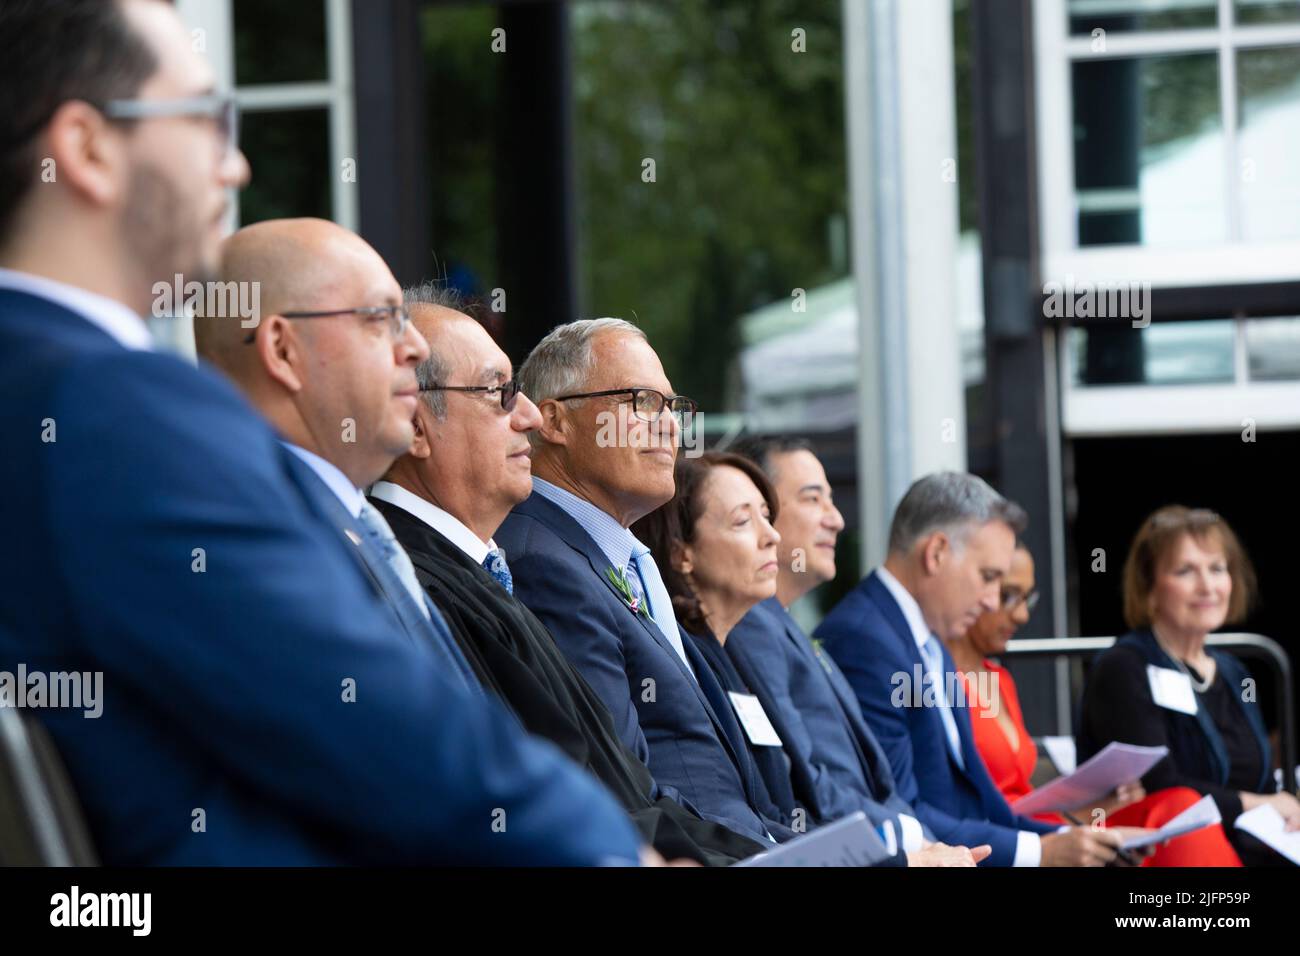 Seattle, Washington, USA. 4th July, 2022. Dignitaries including Washington Governor Jay Inslee (center), congresswoman Suzan DelBene (center right) and Washington Secretary of State Steve Hobbs (right) prepare for a naturalization ceremony at Fisher Pavilion. The U.S. Citizenship and Immigration Services and U.S. District Court for the Western District of Washington partnered with Seattle Center to host the annual ceremony welcoming 300. Credit: Paul Christian Gordon/Alamy Live News Stock Photo